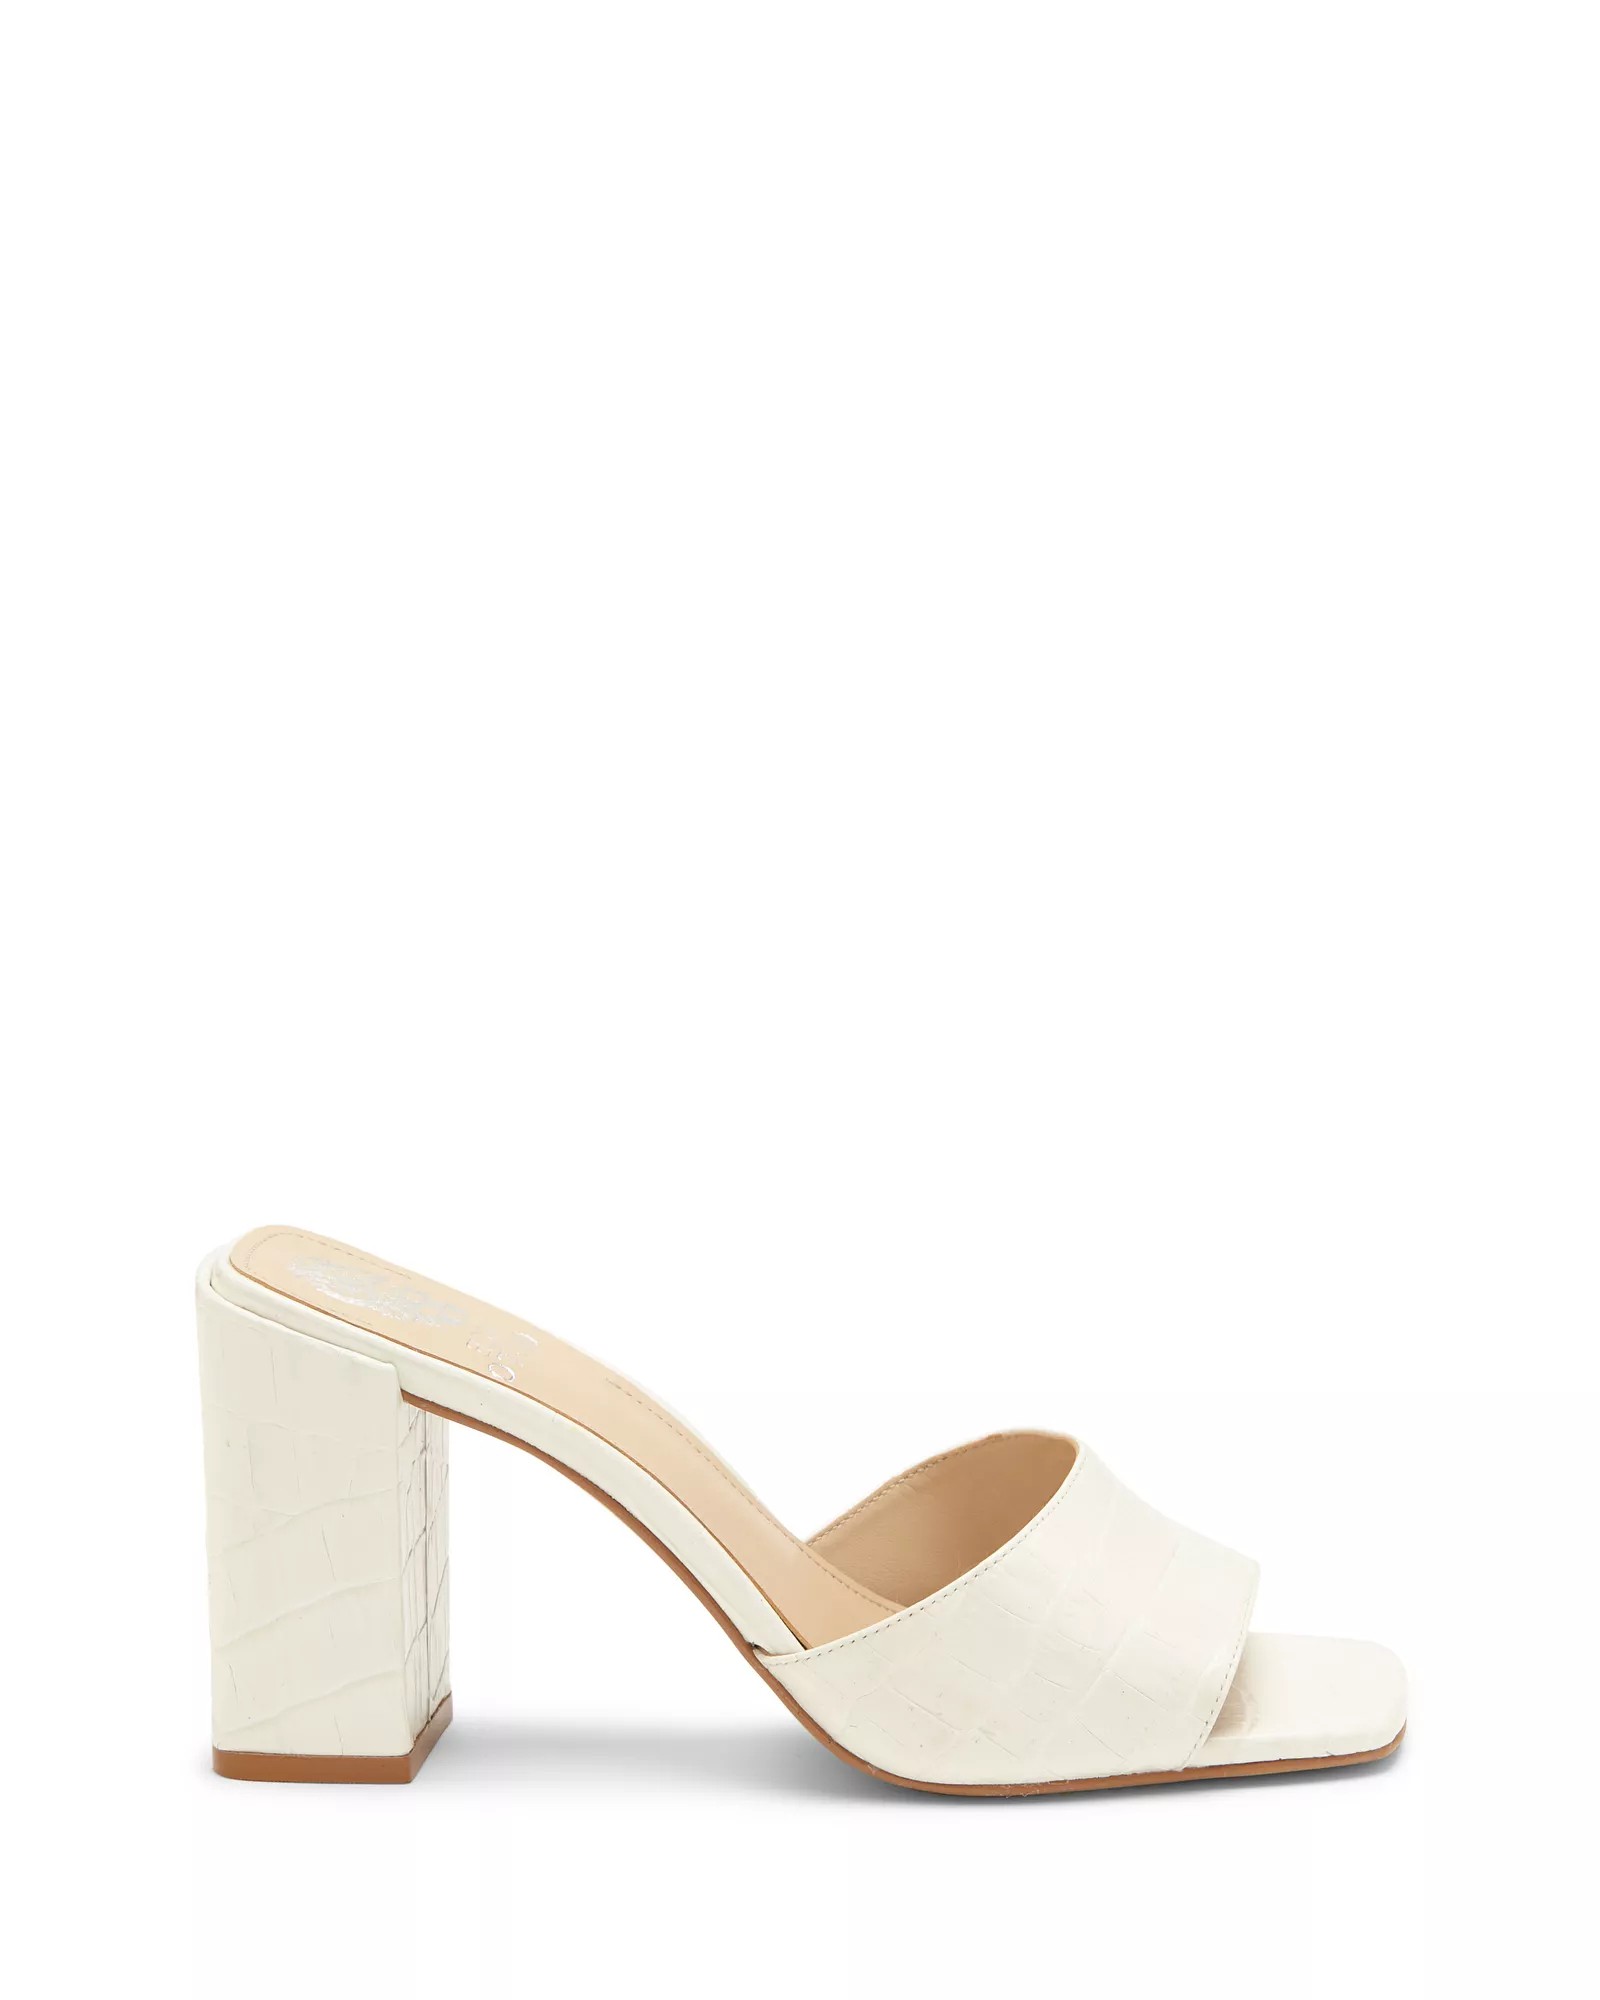 white vince camuto heels